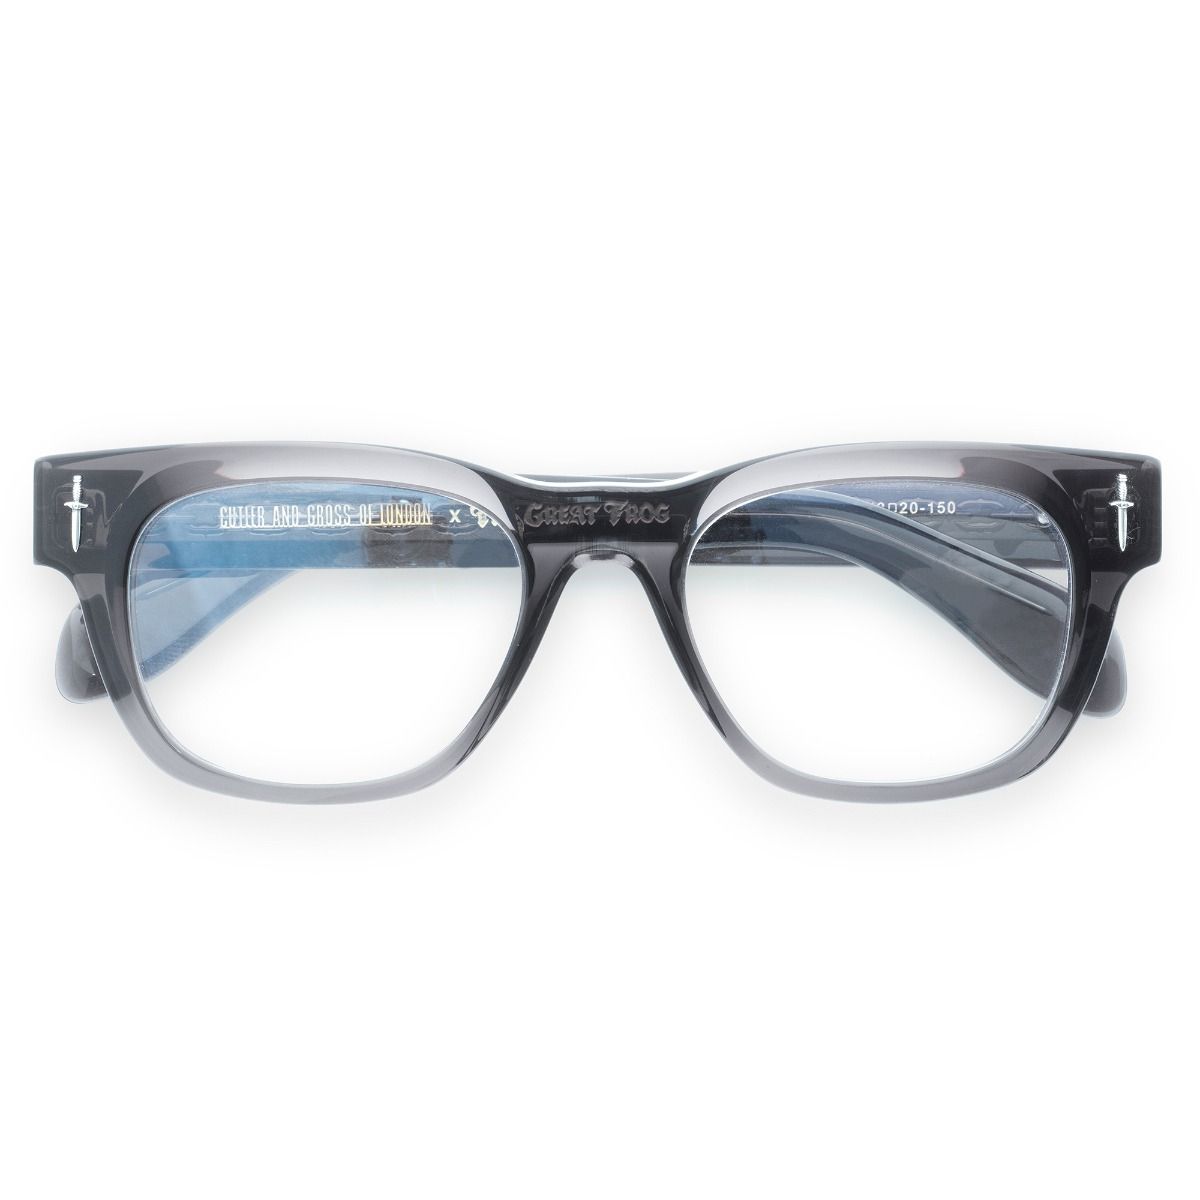 The Great Frog Crossbones Square Optical Glasses-Pewter Grey